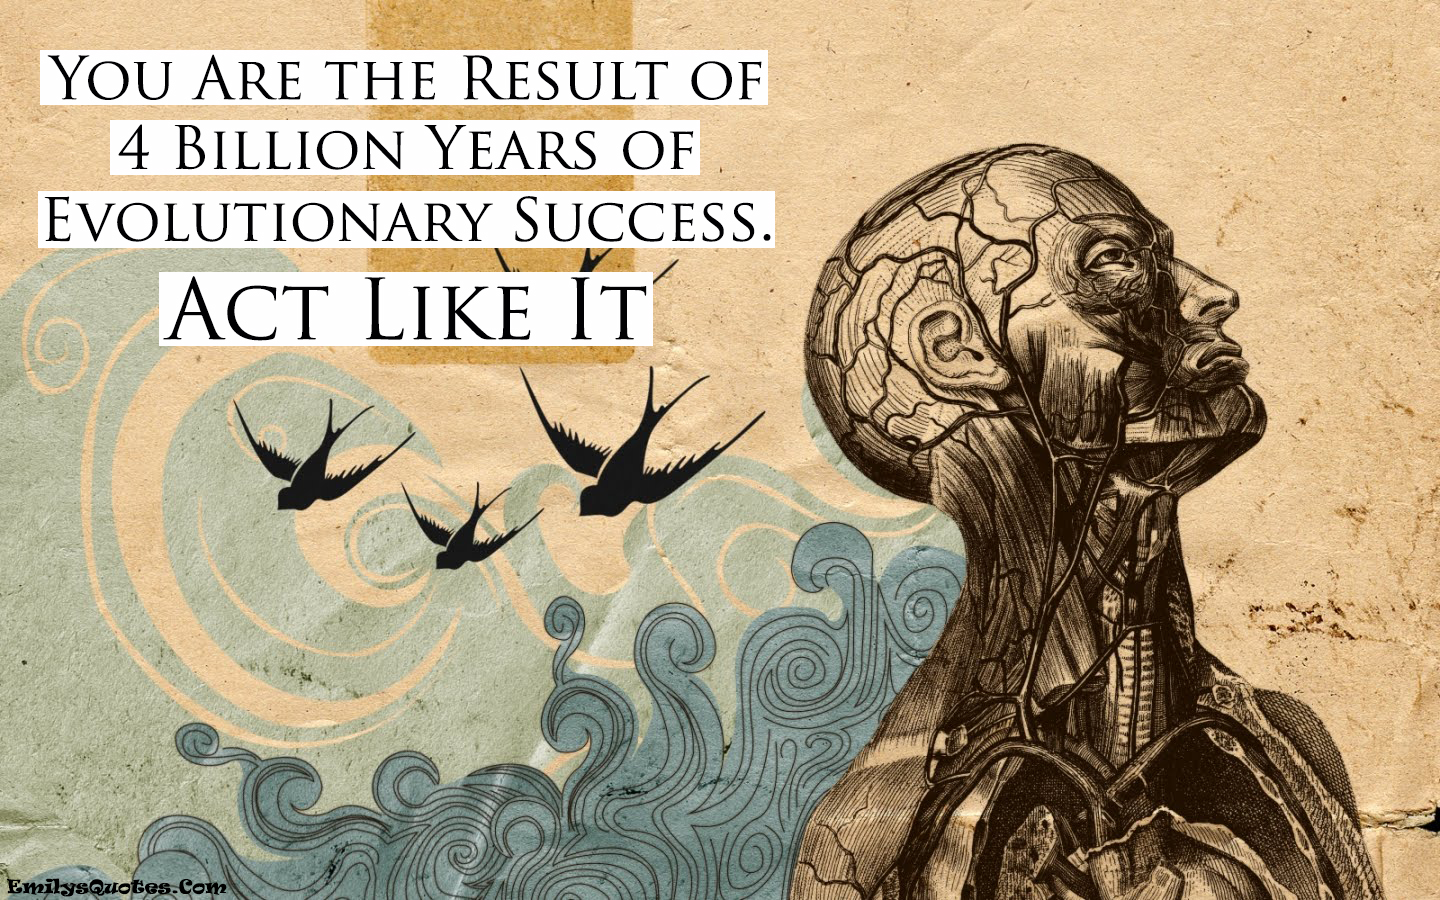 You Are the Result of 4 Billion Years of Evolutionary Success. Act Like It